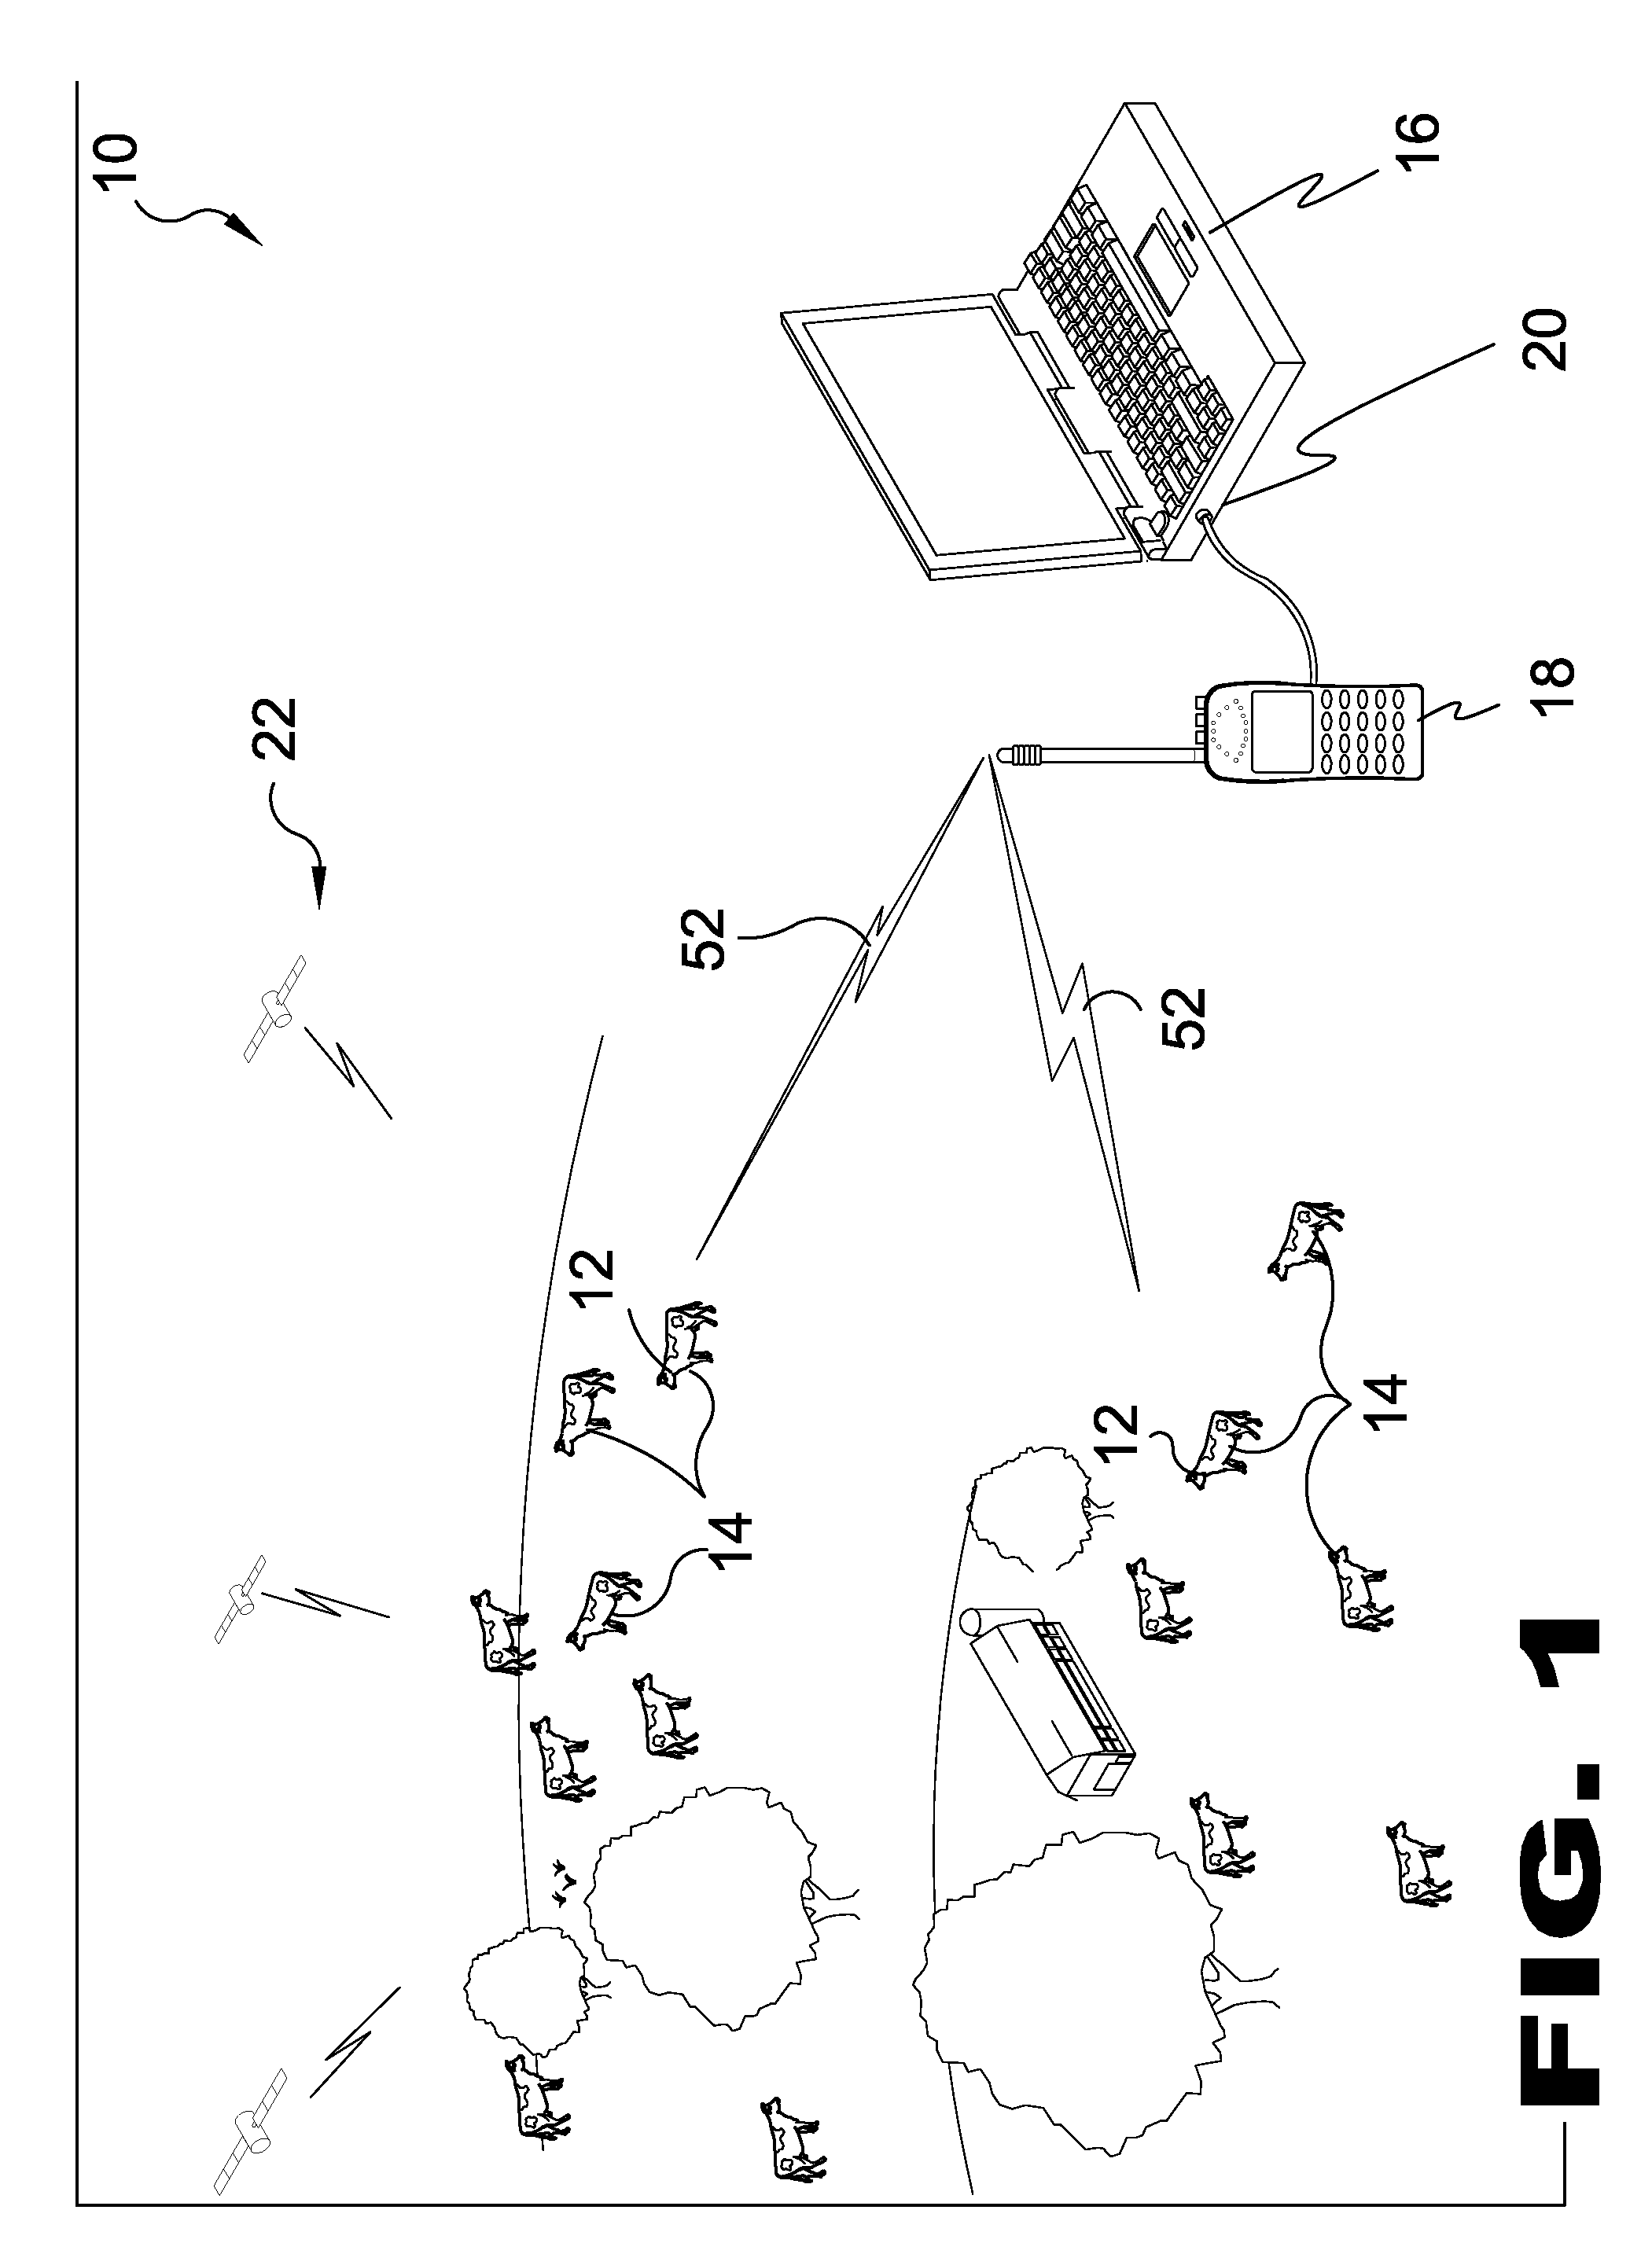 Method and apparatus for data logging of physiological and environmental variables for domestic and feral animals